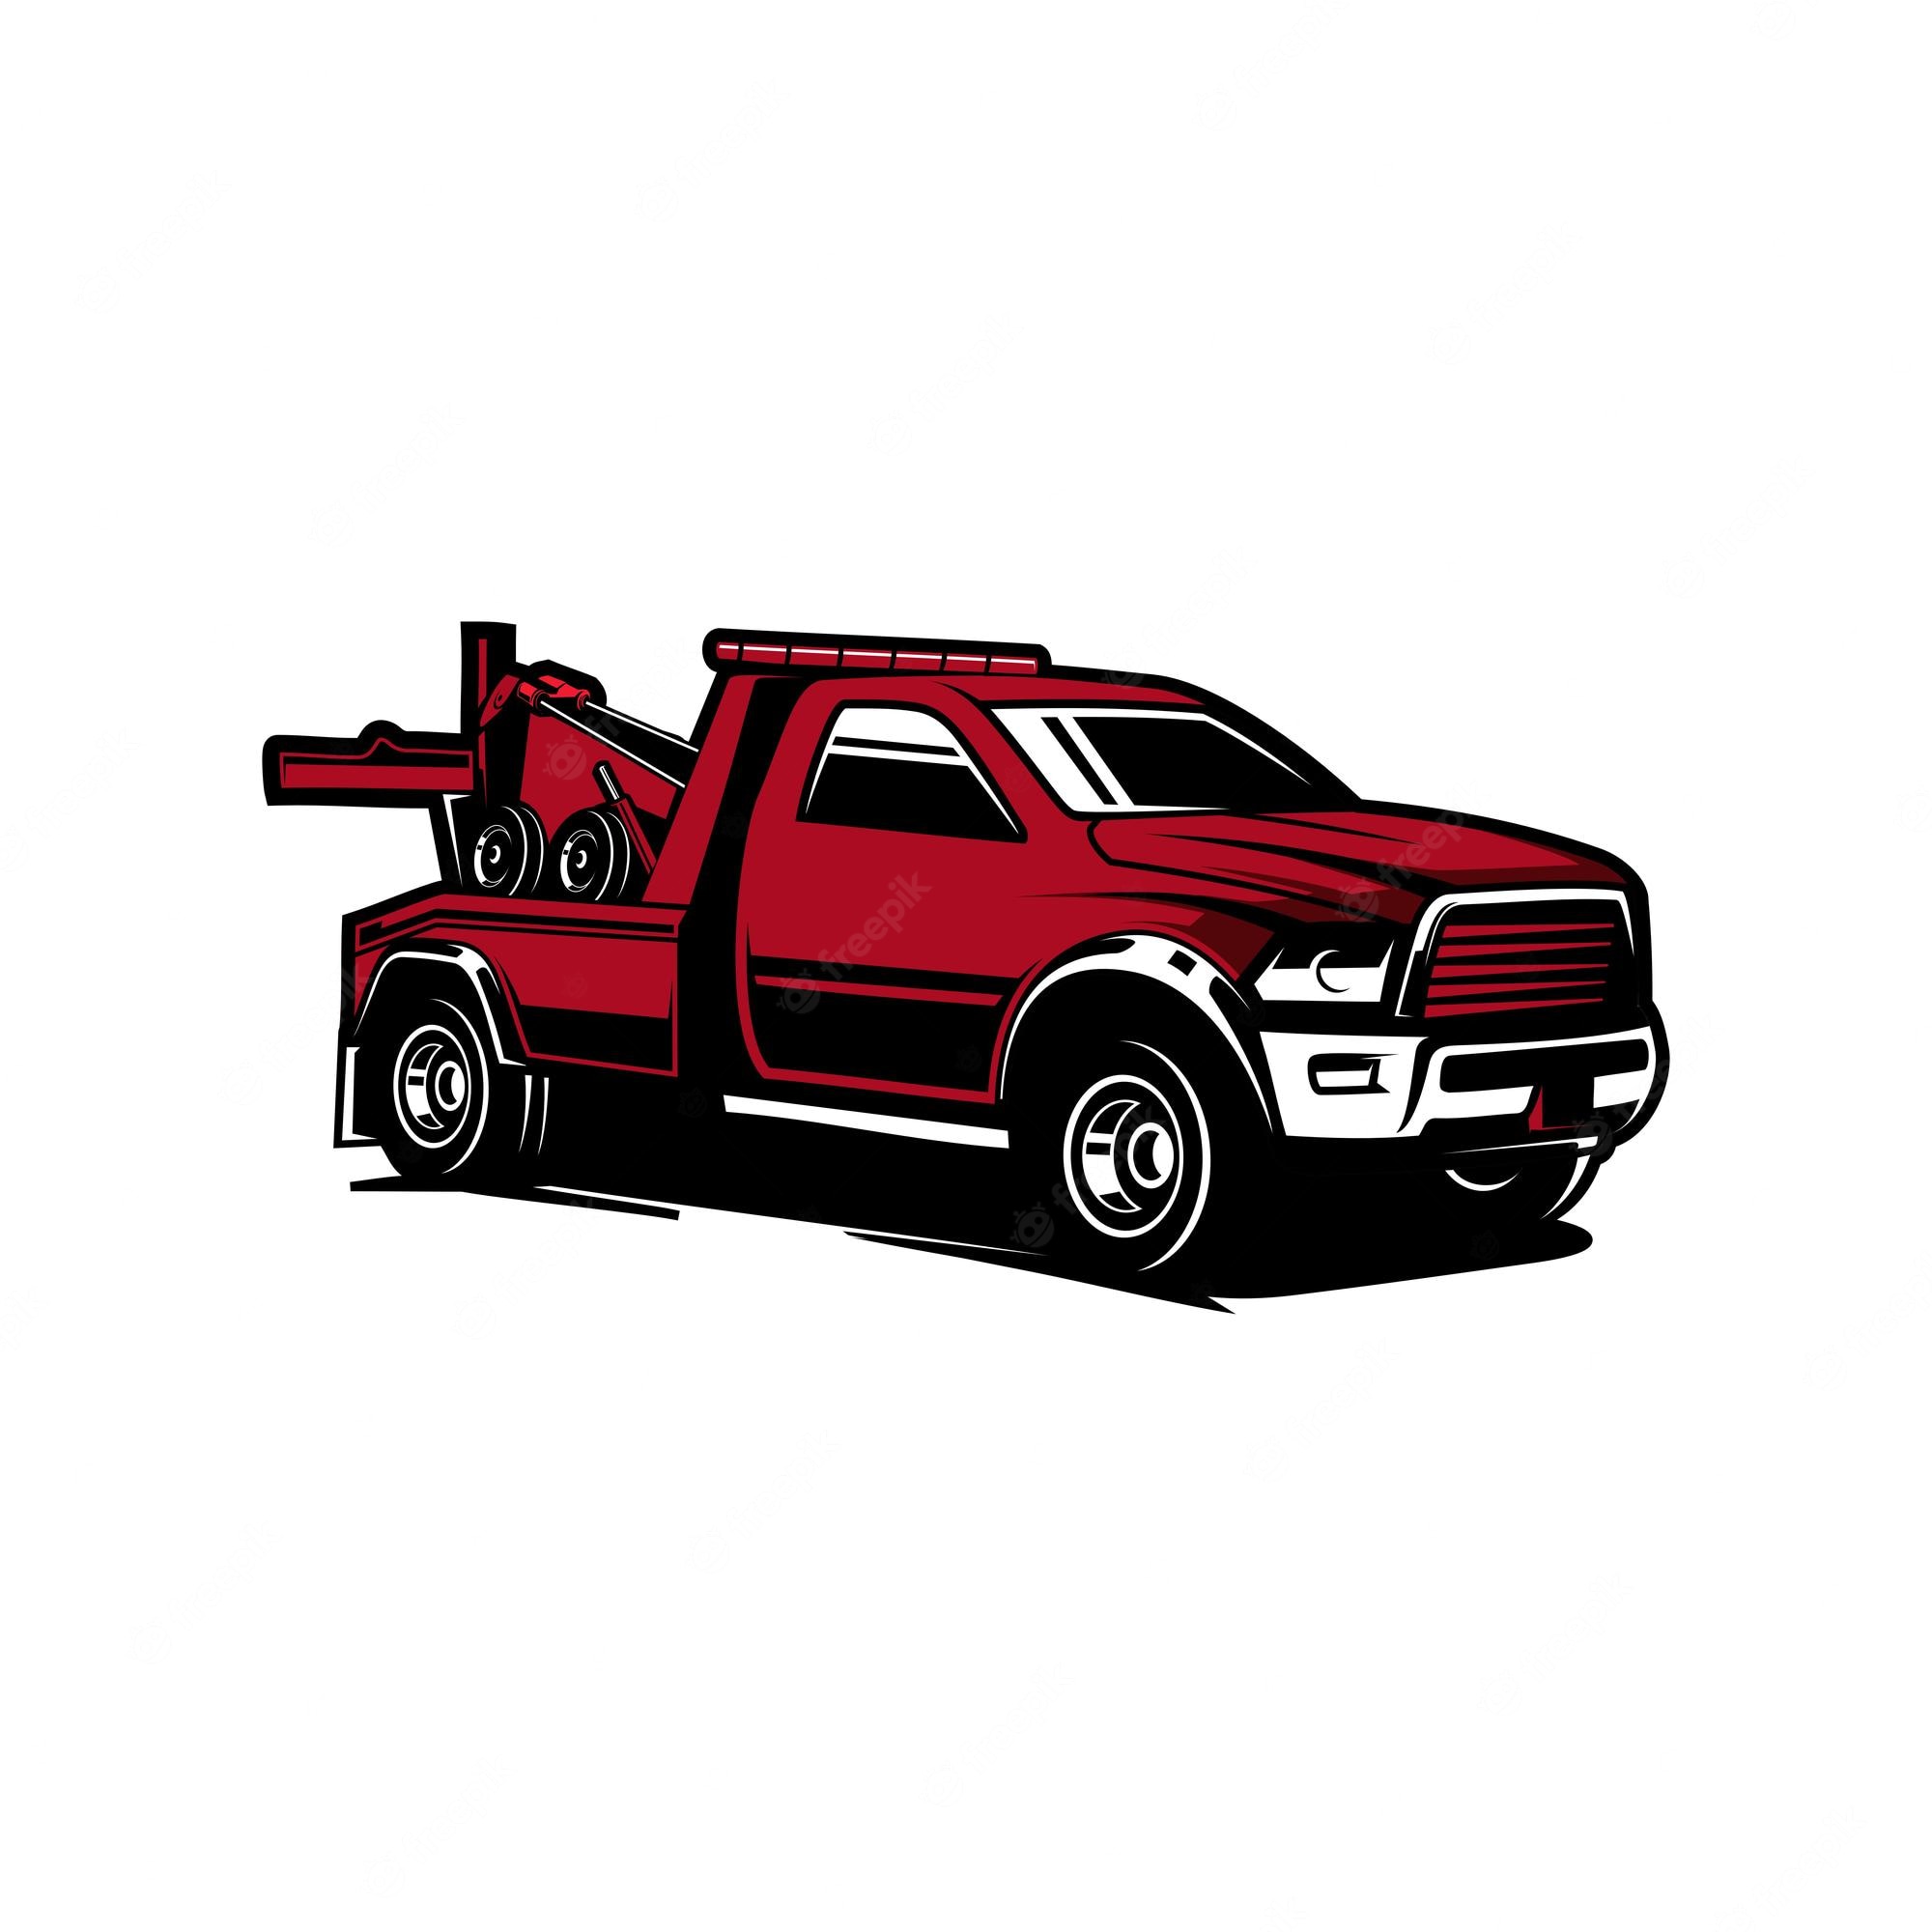 Rollback Truck svg, Flatbed Truck Svg, Tow Truck svg, Rollback Truck ...